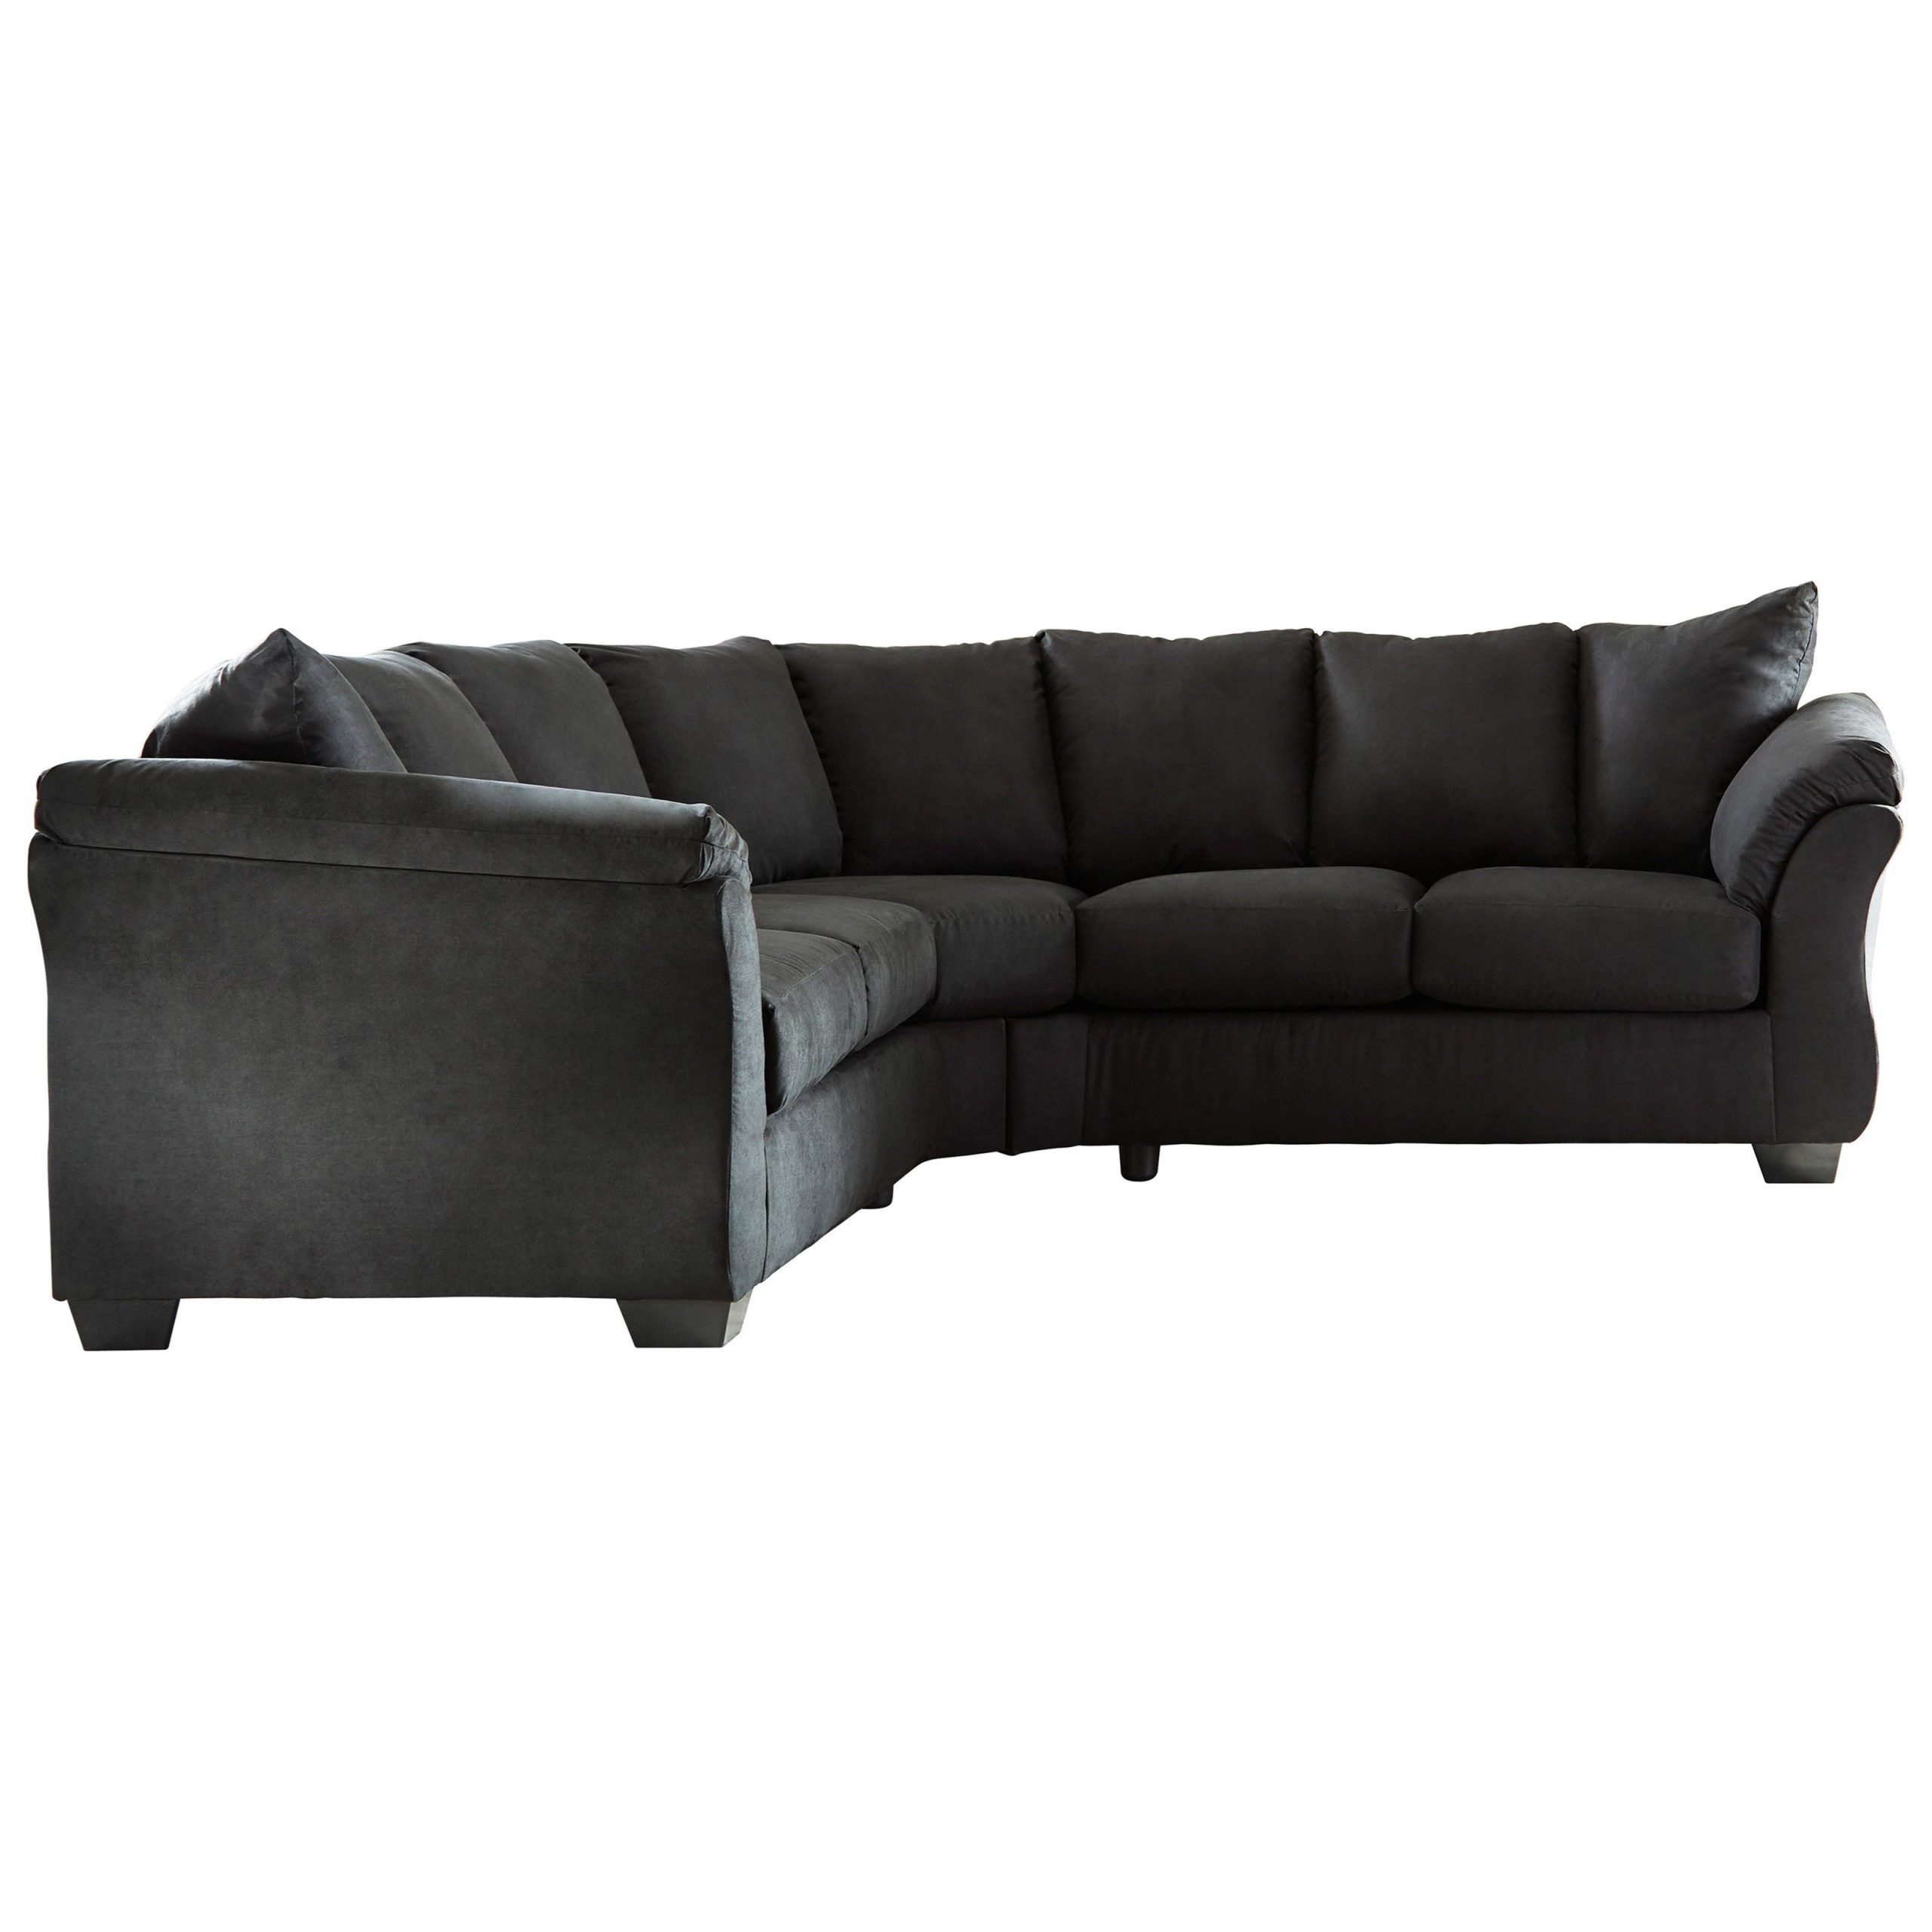 Contemporary Sectional Sofa With Sweeping Pillow Arms 104" X 104" Black Within Recent 104" Sectional Sofas (View 2 of 15)